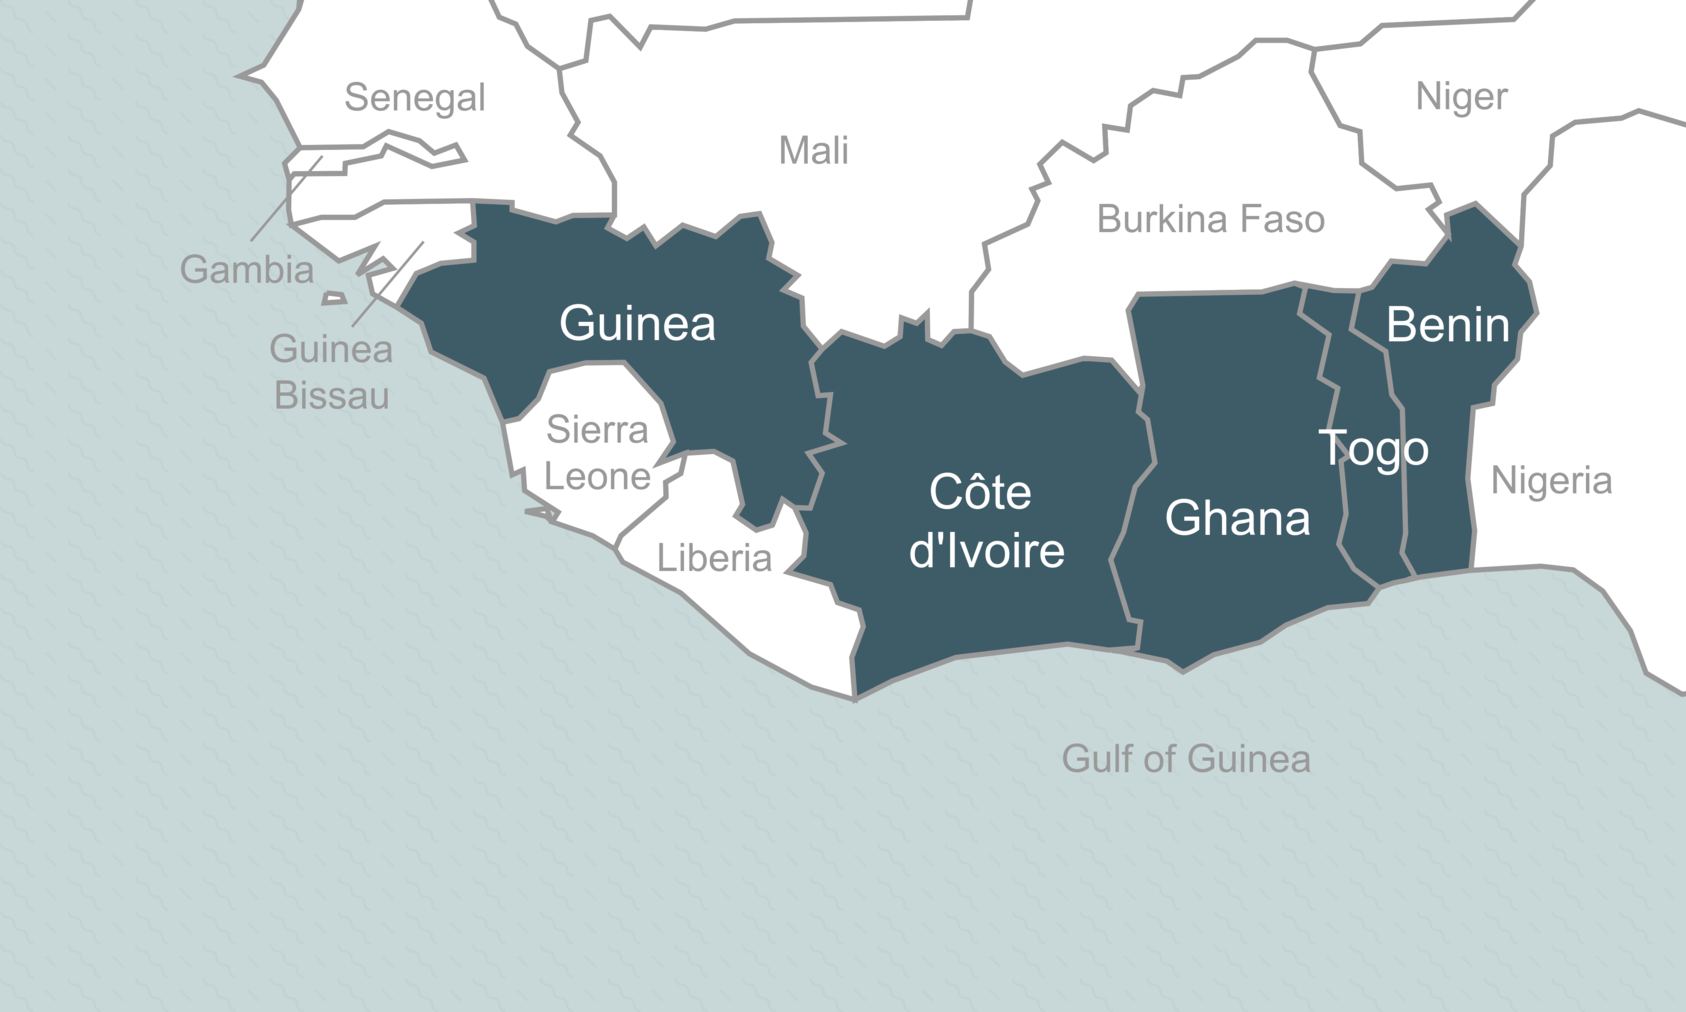 May of coastal west Africa countries